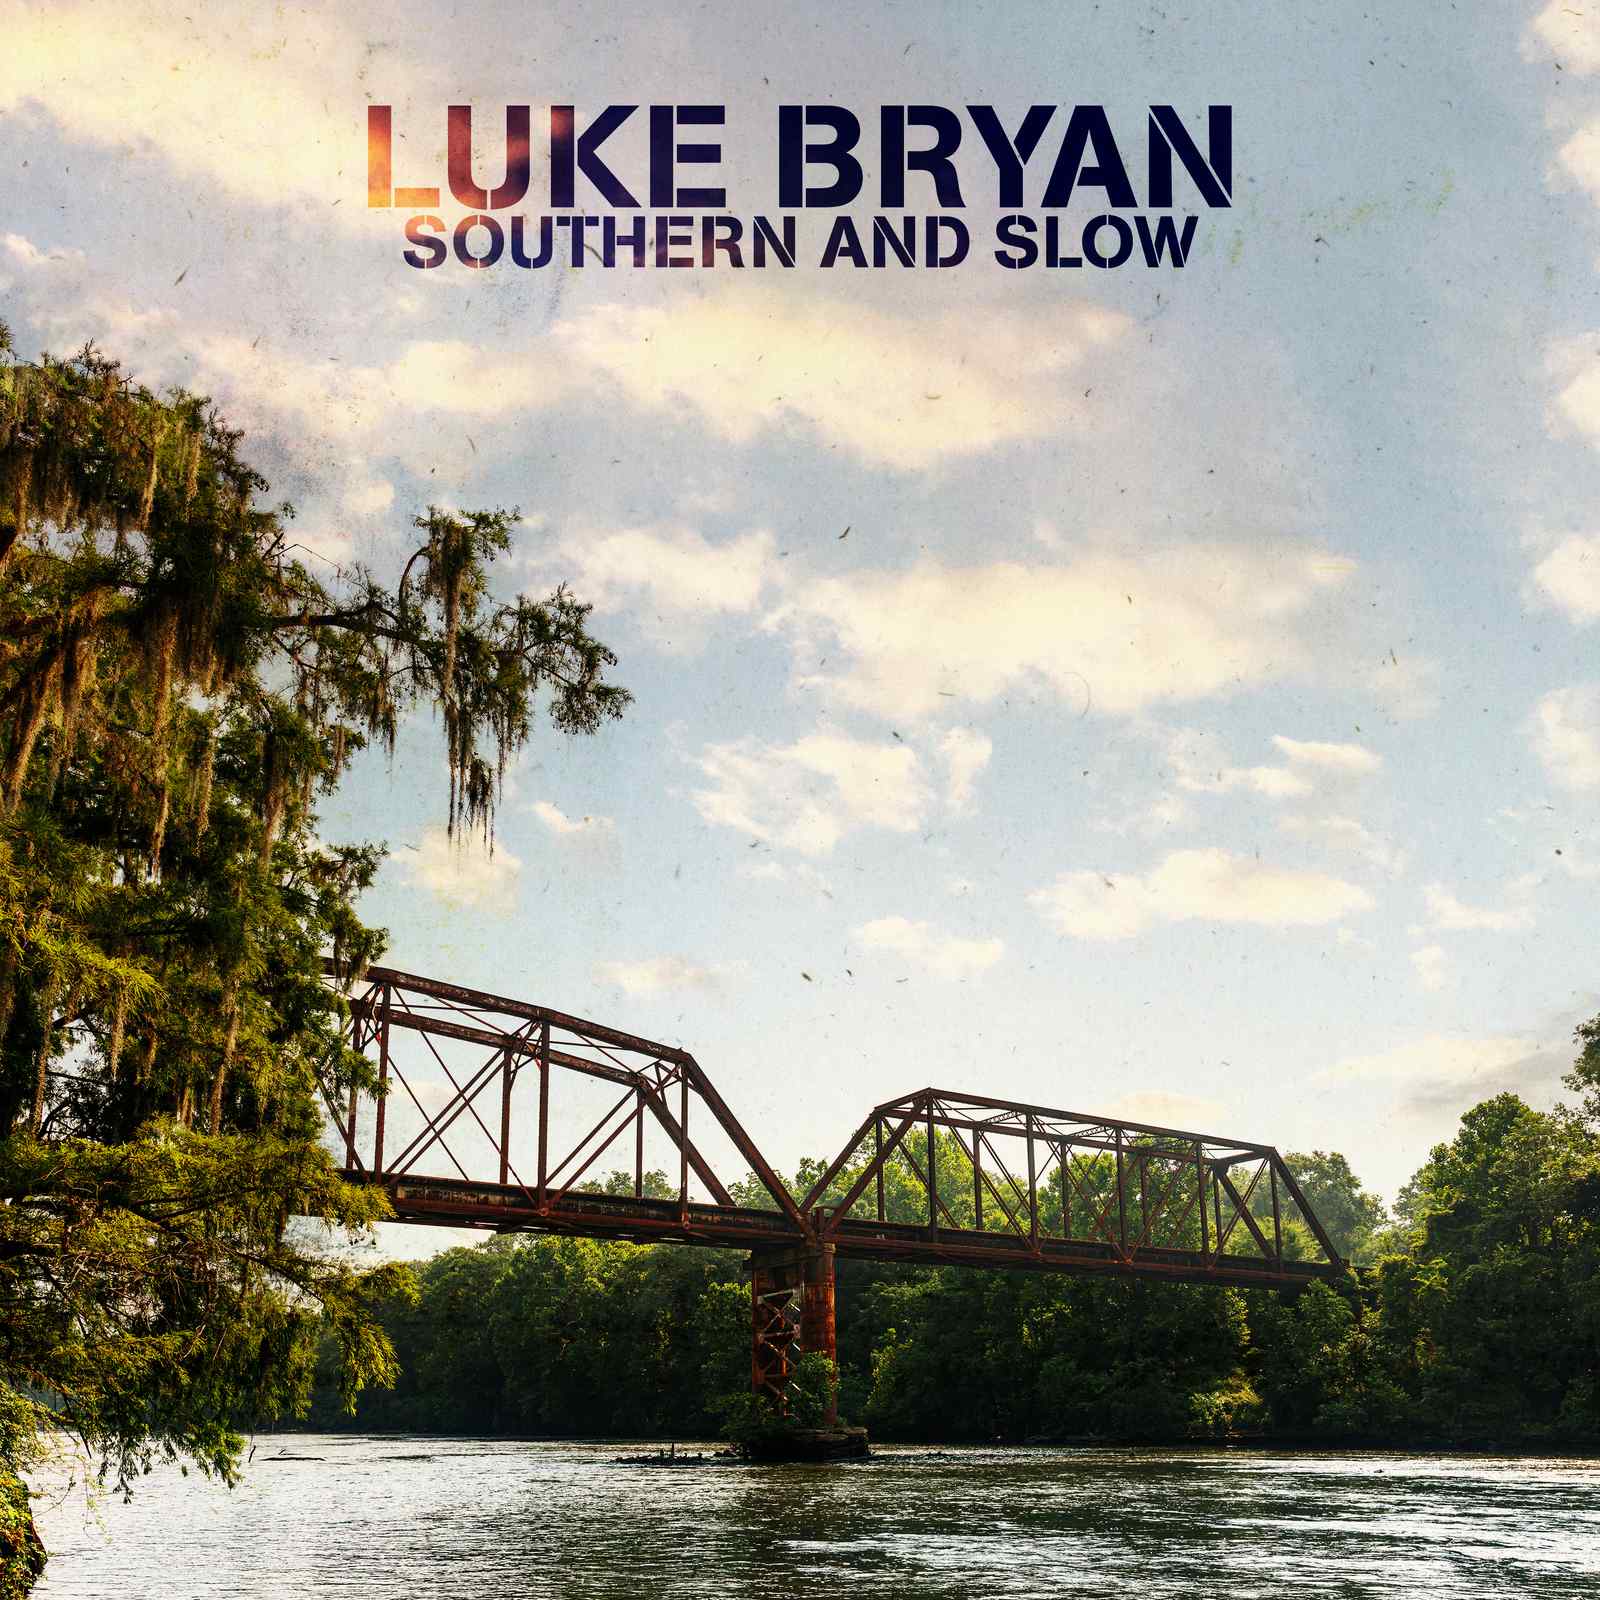 Luke Bryan Releases New Song “Southern and Slow” TODAY!